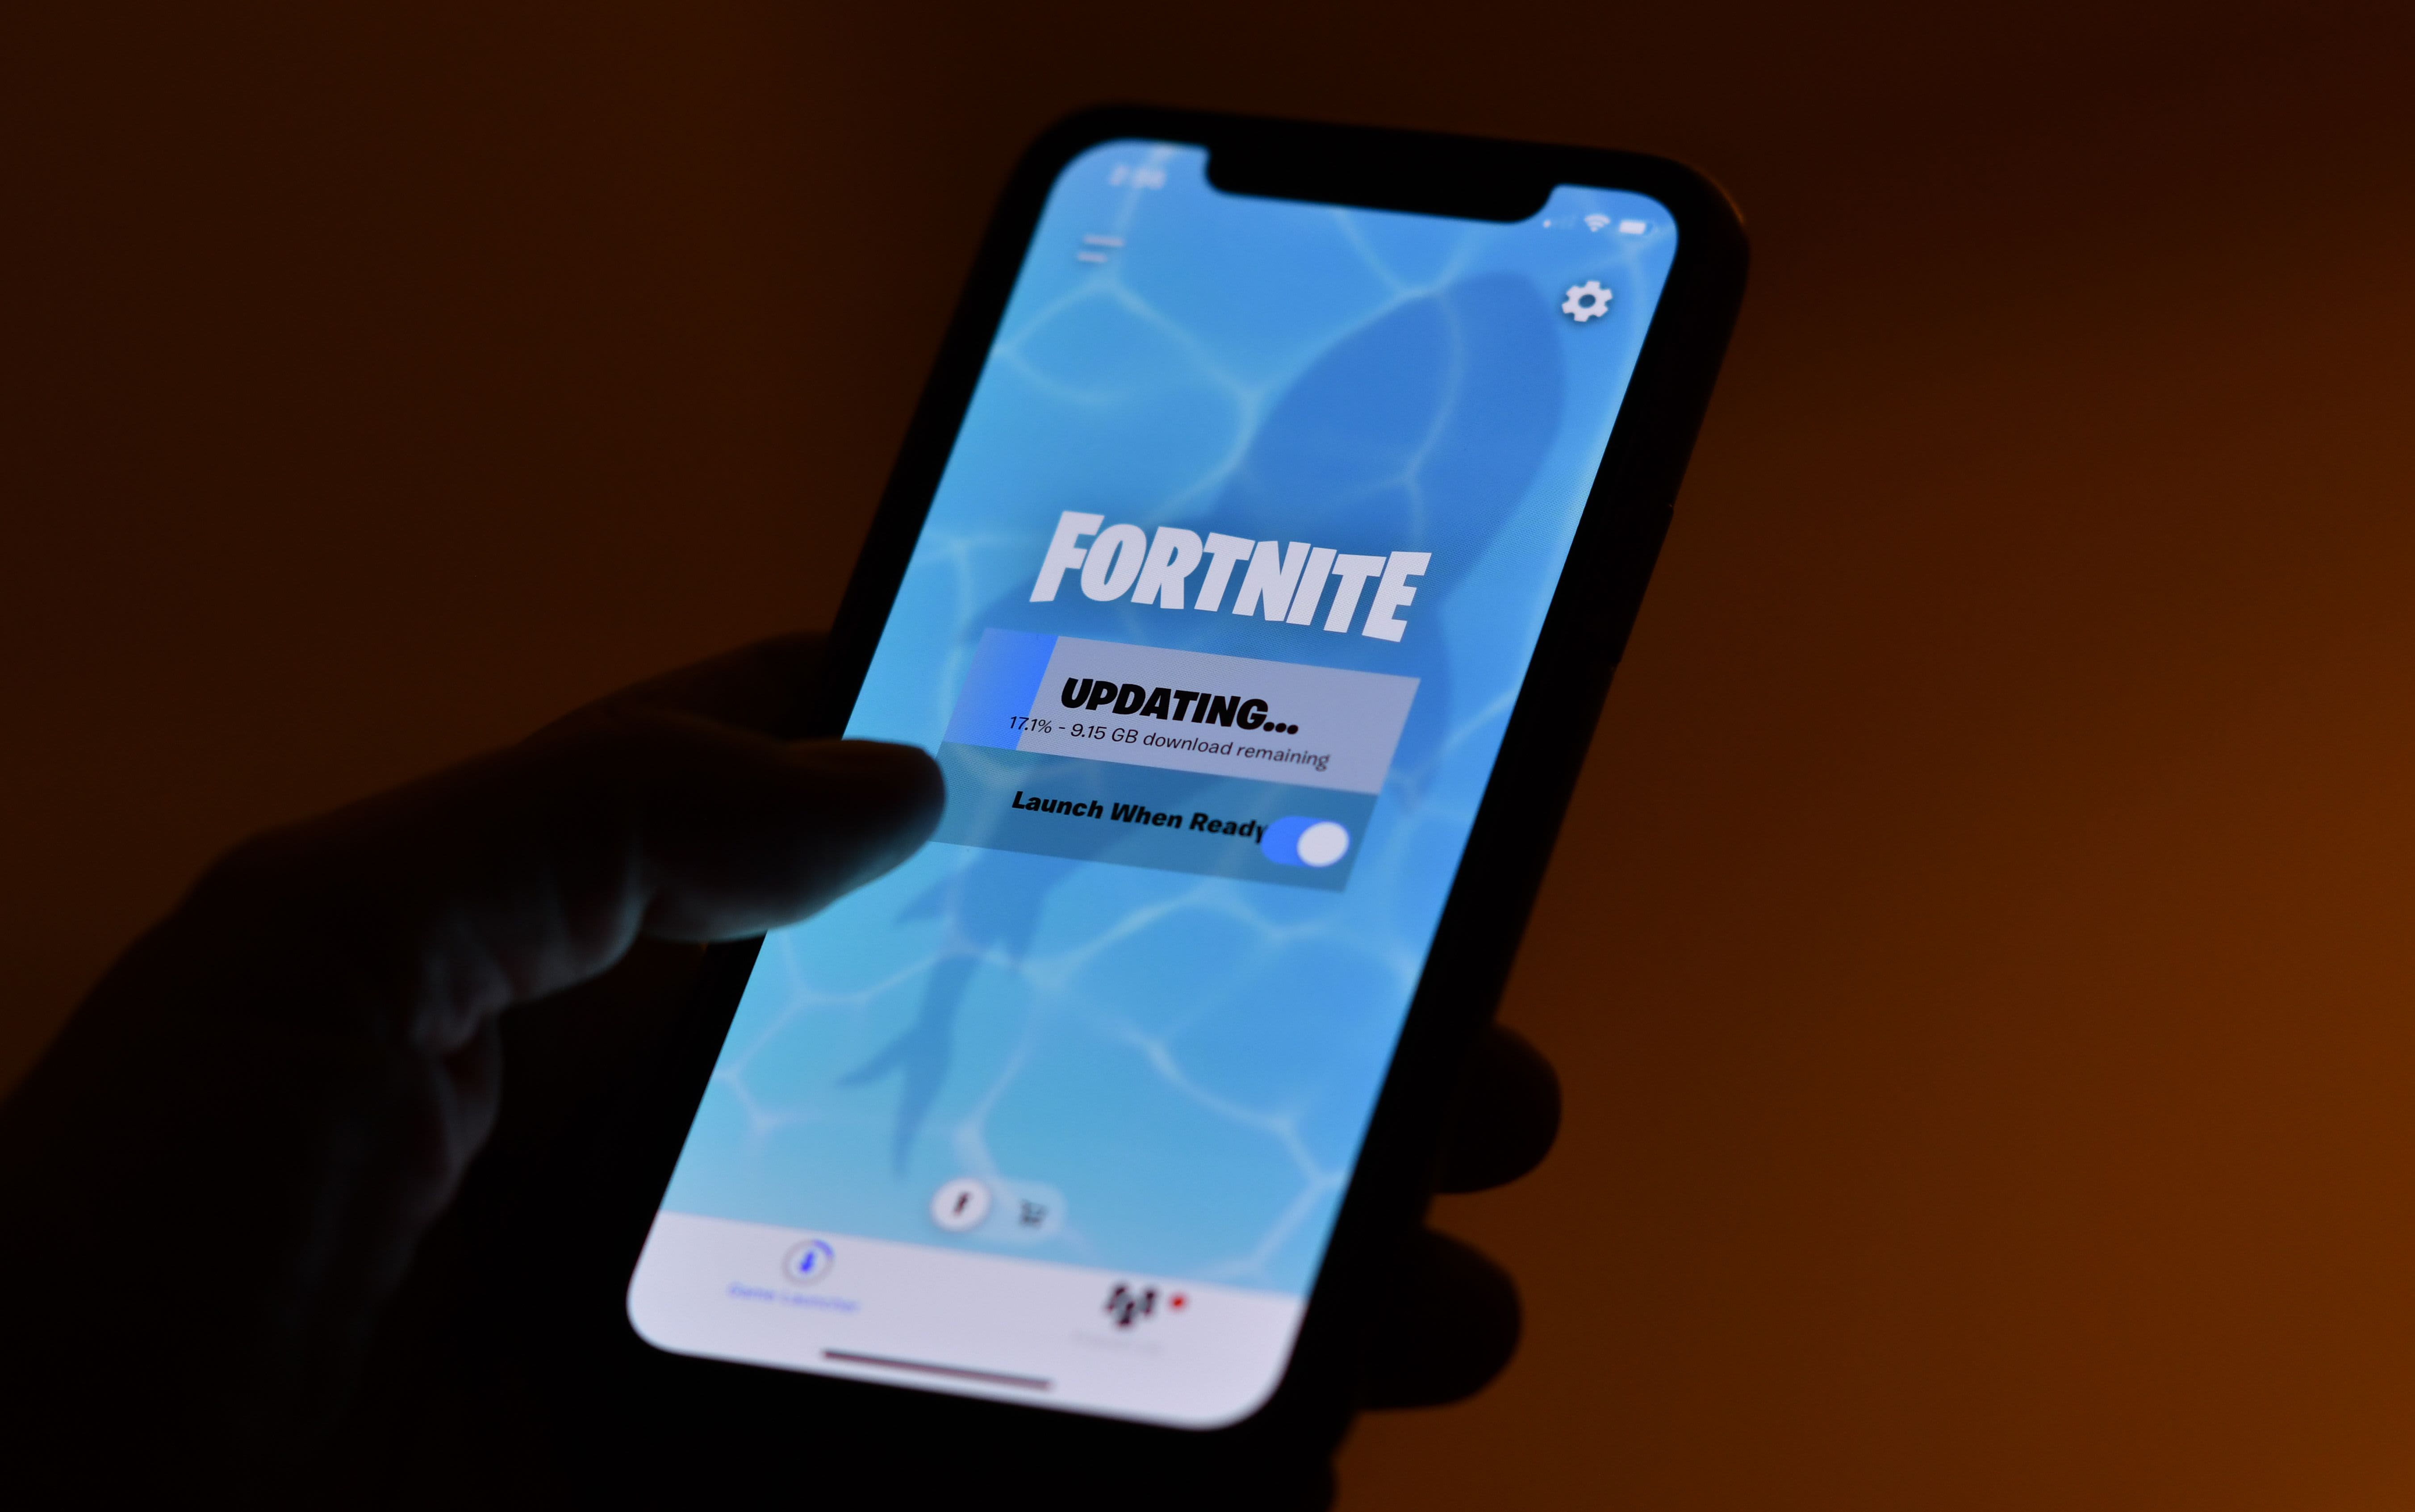 Fortnite creator Epic Games' valuation jumps to $29 billion in new funding round - CNBC